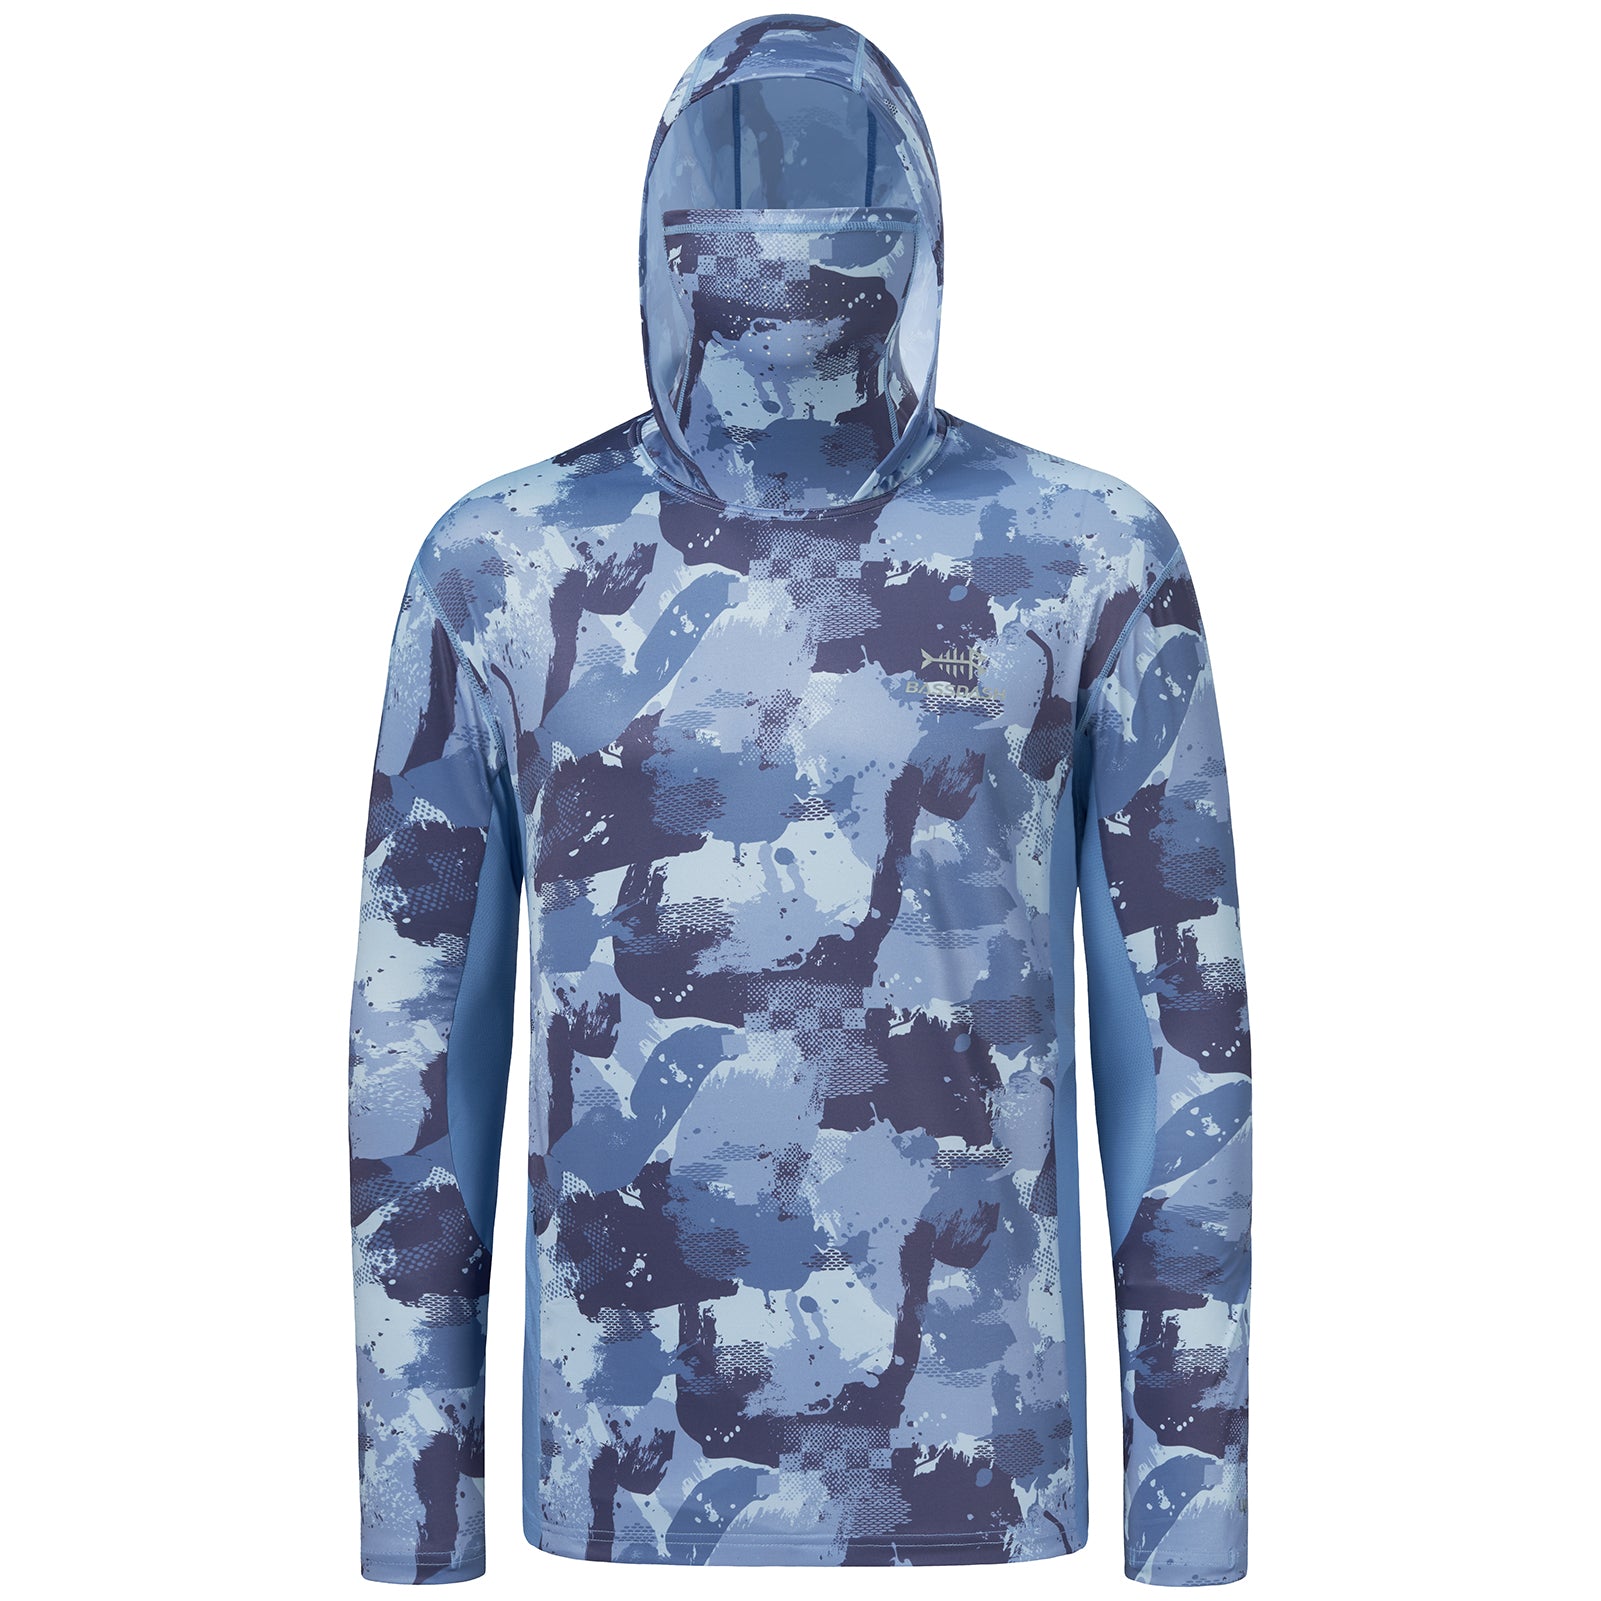 Men's UPF 50+ Camo Fishing Hoodie Shirts with Face Cover FS25M, Blue Camo with neck gaiter / 3X-Large